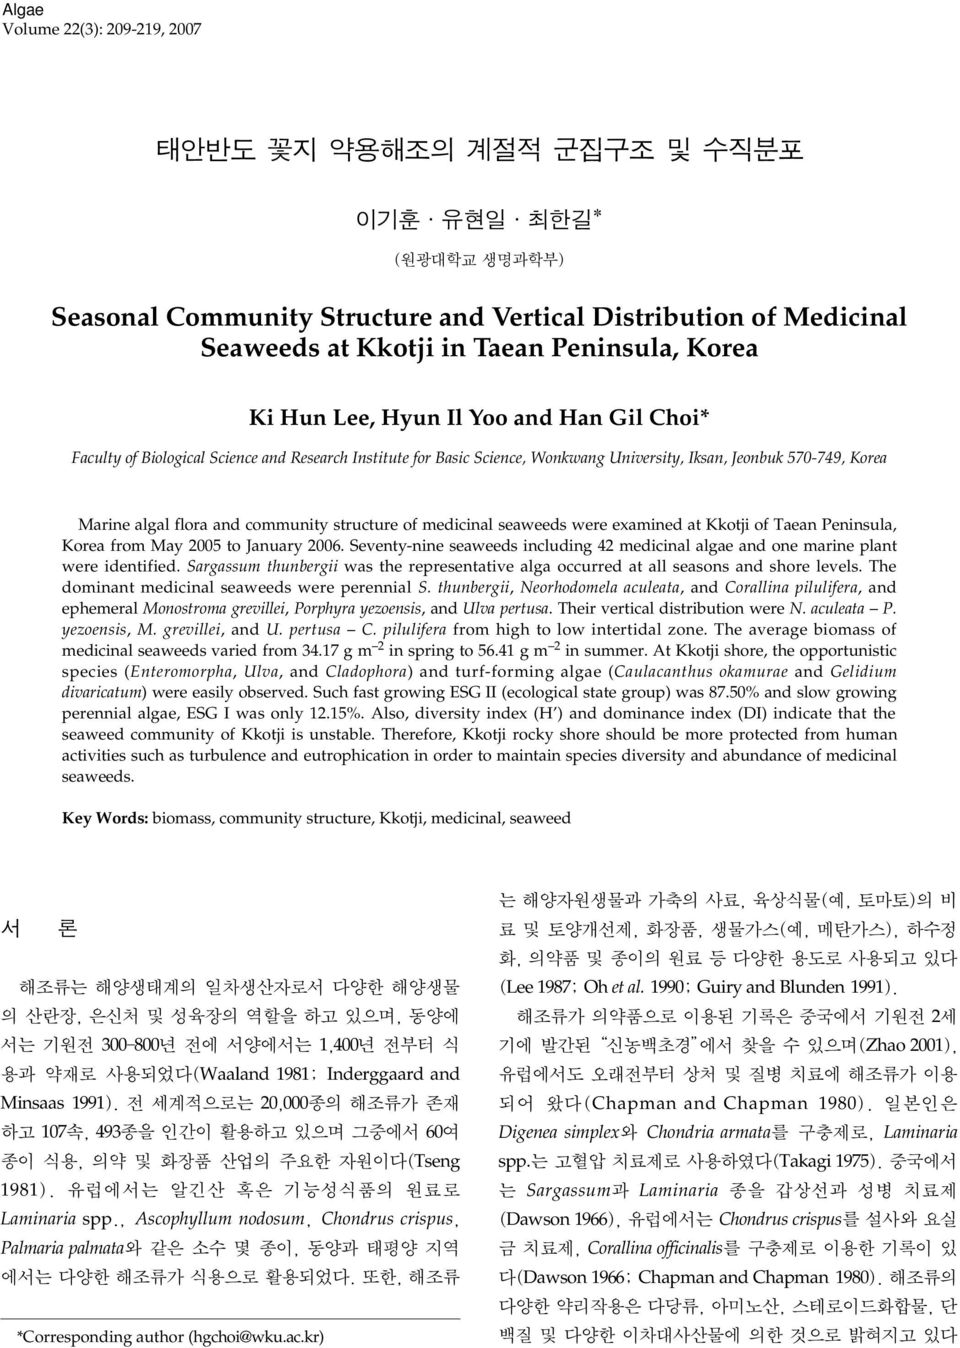 community structure of medicinal seaweeds were examined at Kkotji of Taean Peninsula, Korea from May 2005 to January 2006.